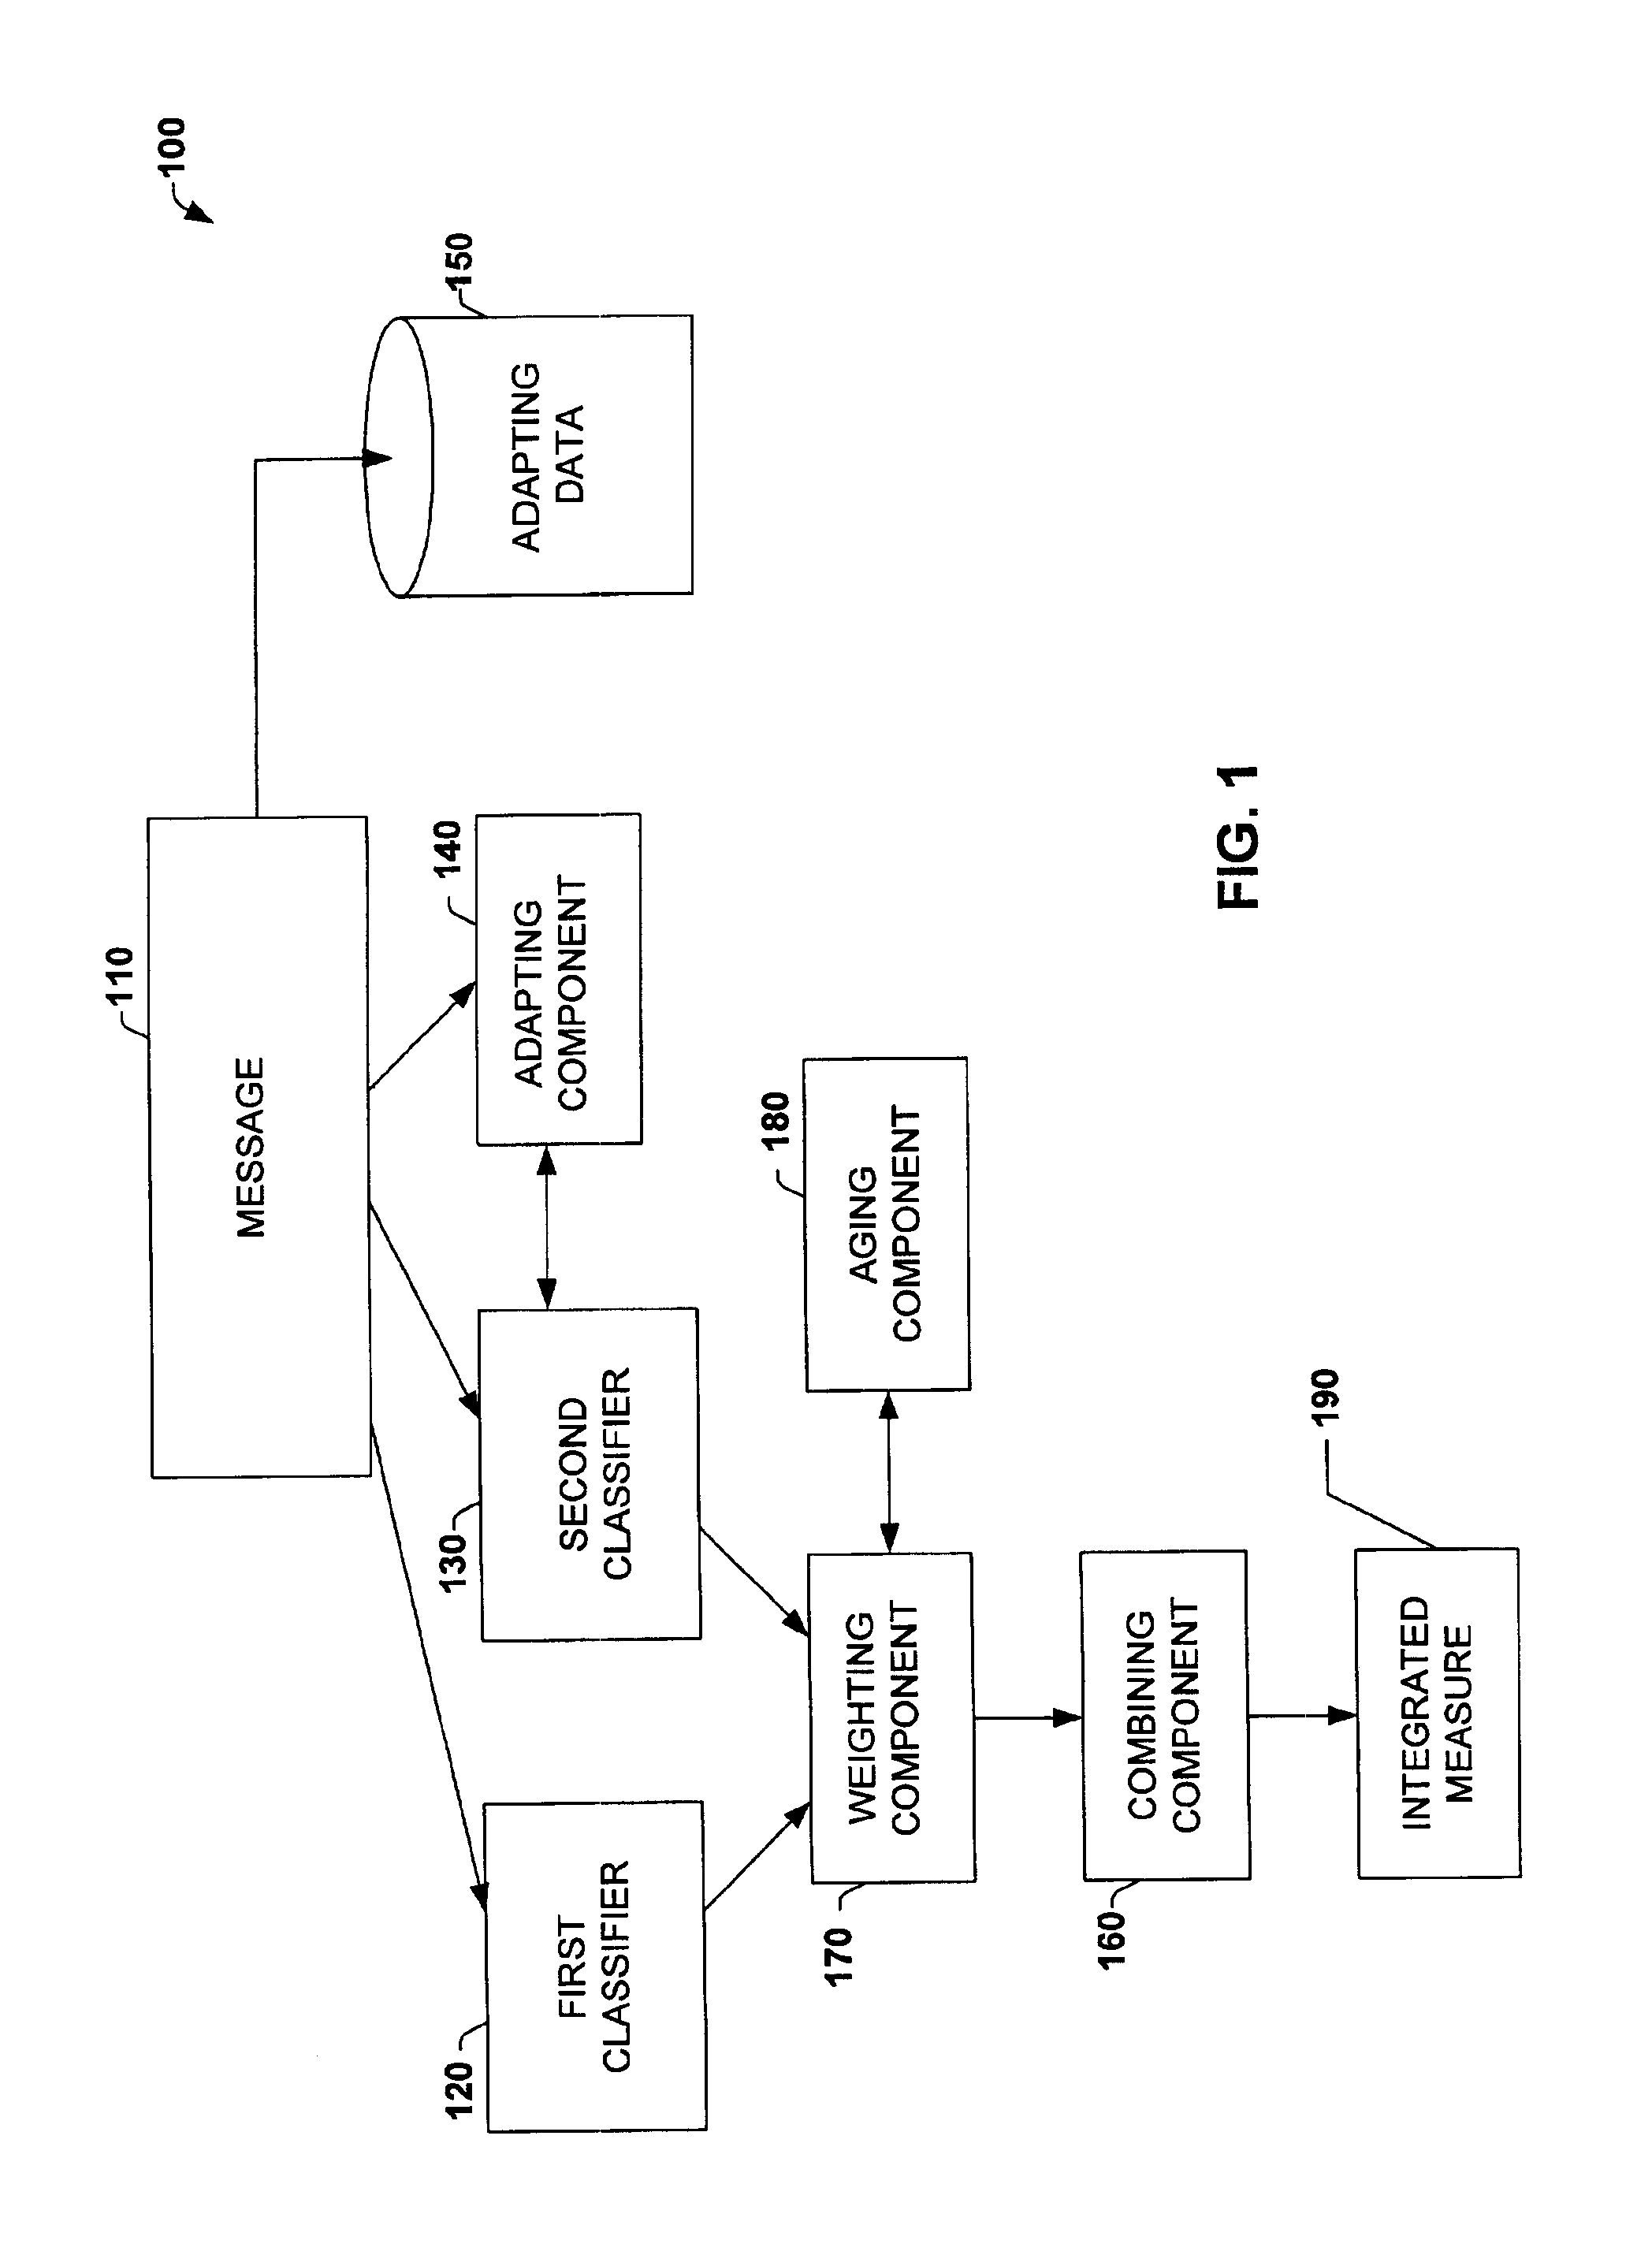 System and method for constructing and personalizing a universal information classifier